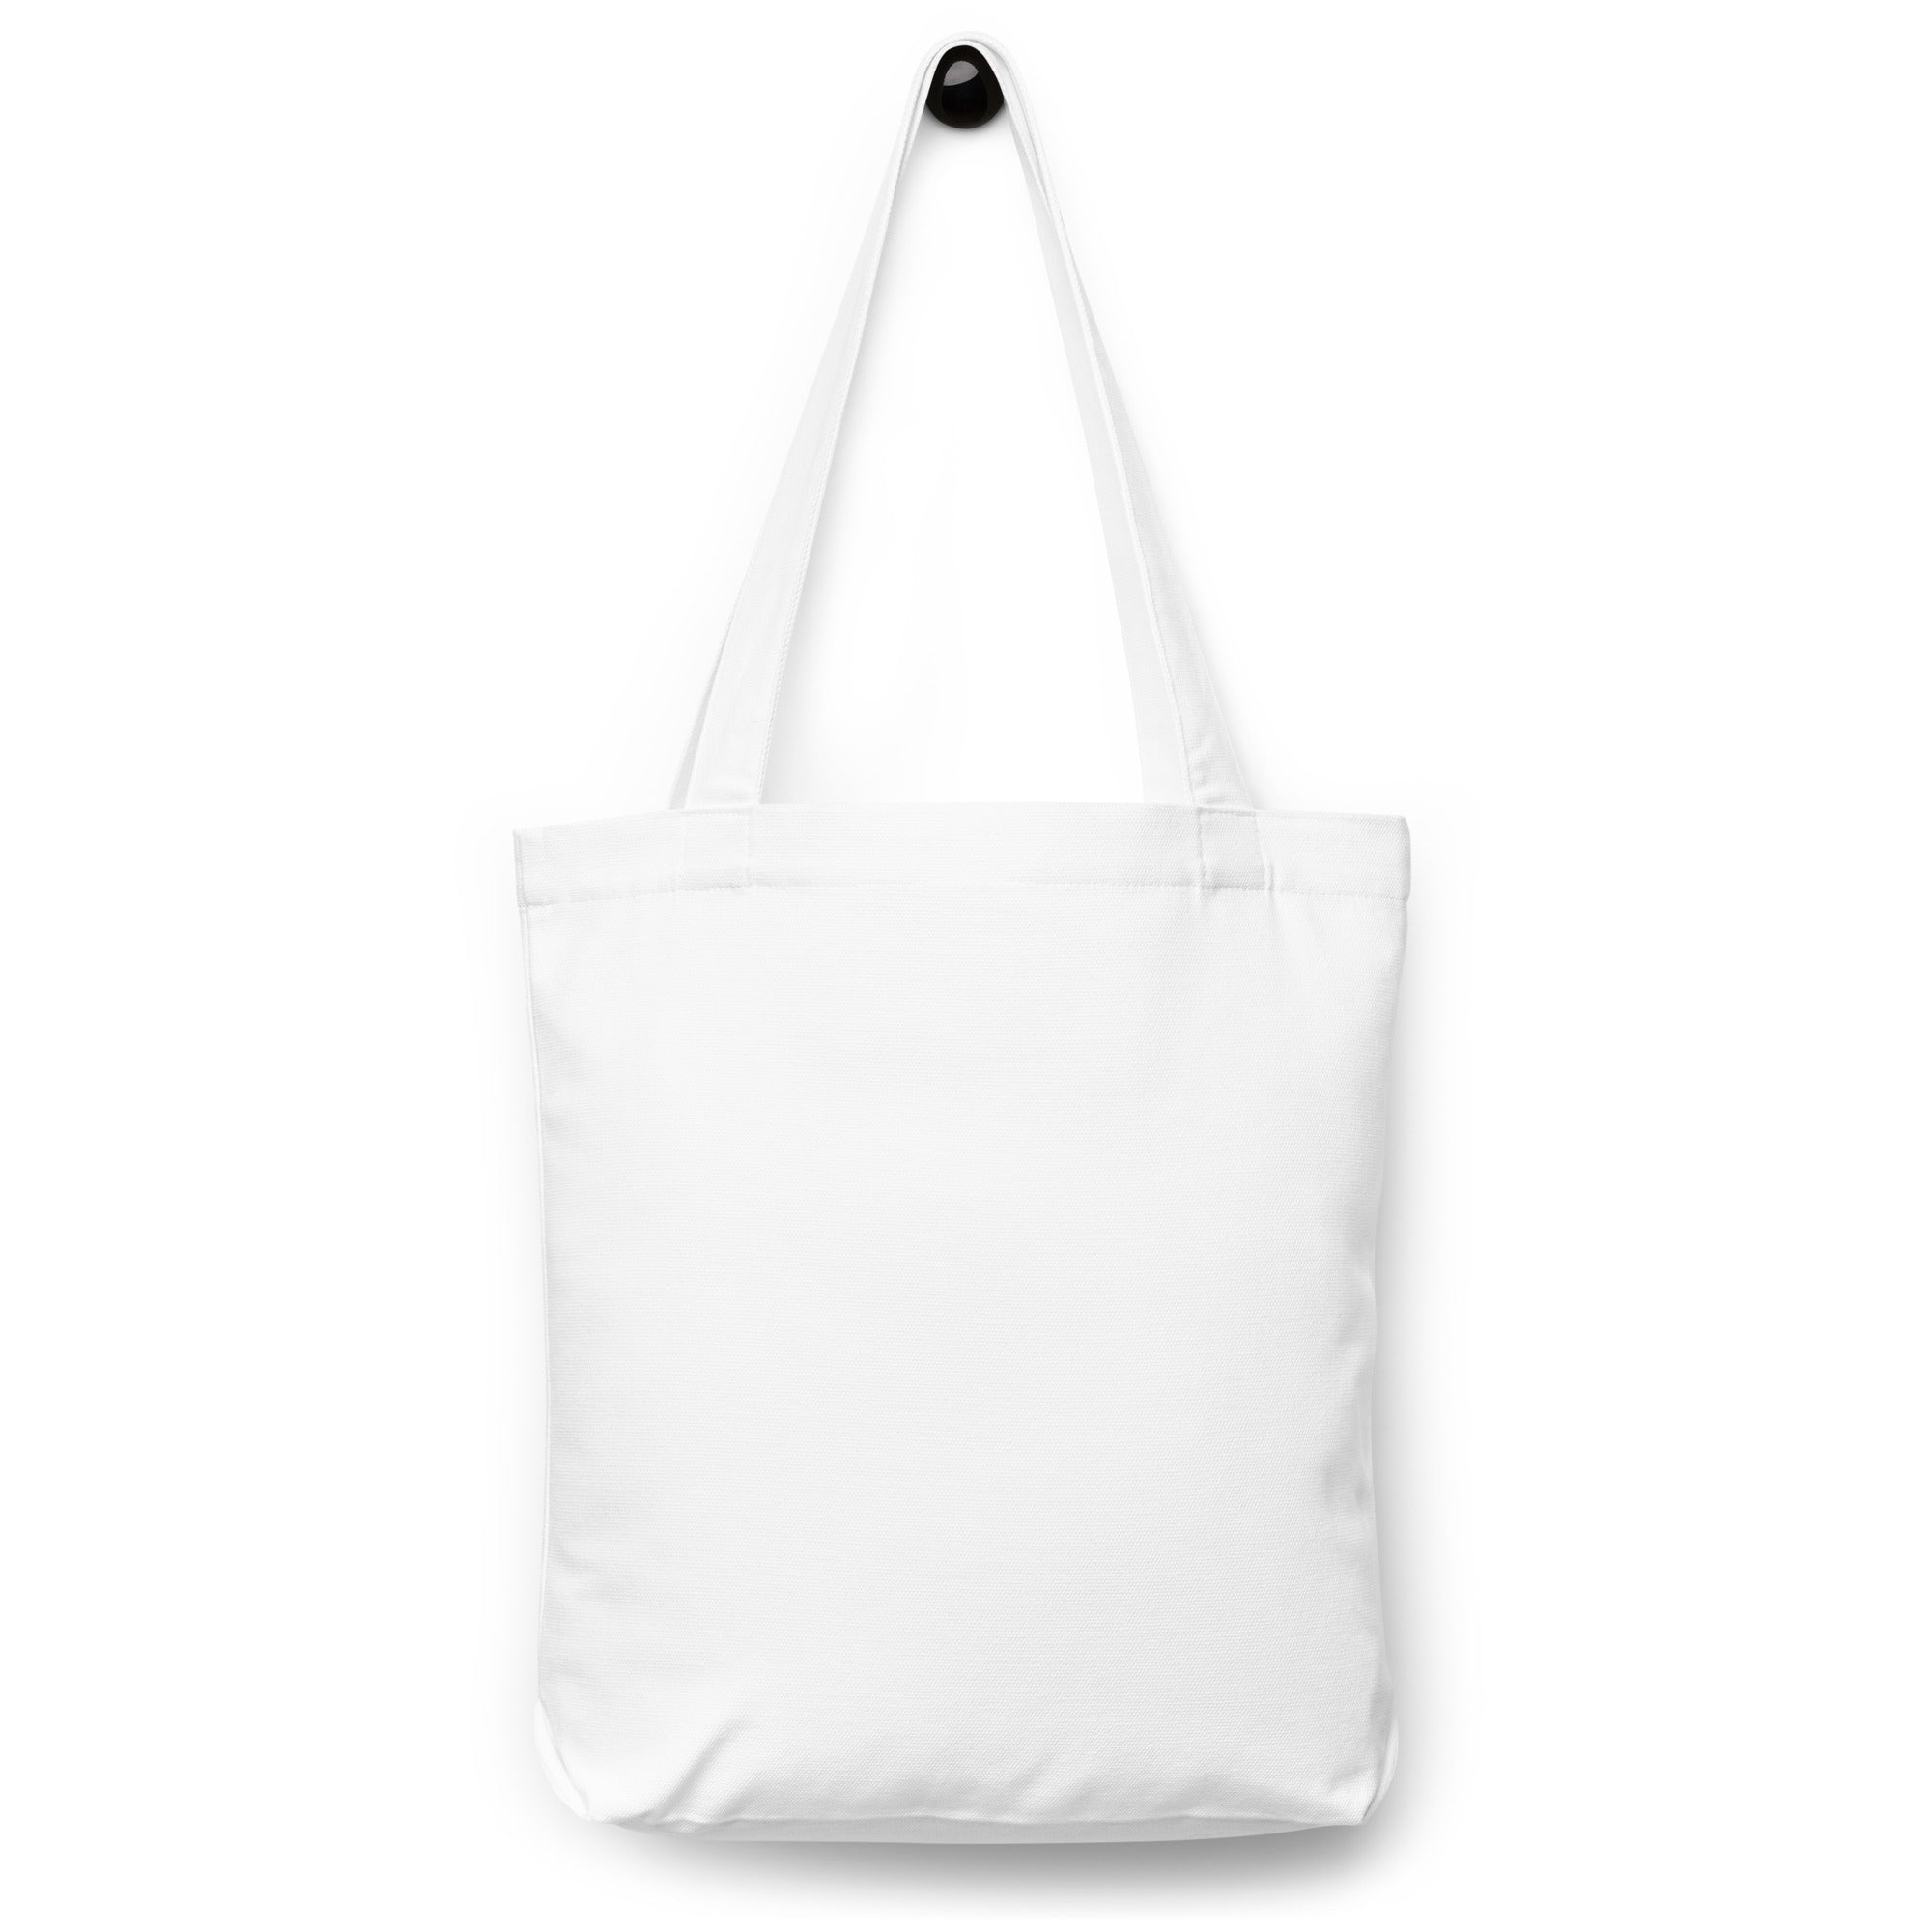 PersonalHour Cotton tote bag - Personal Hour for Yoga and Meditations 